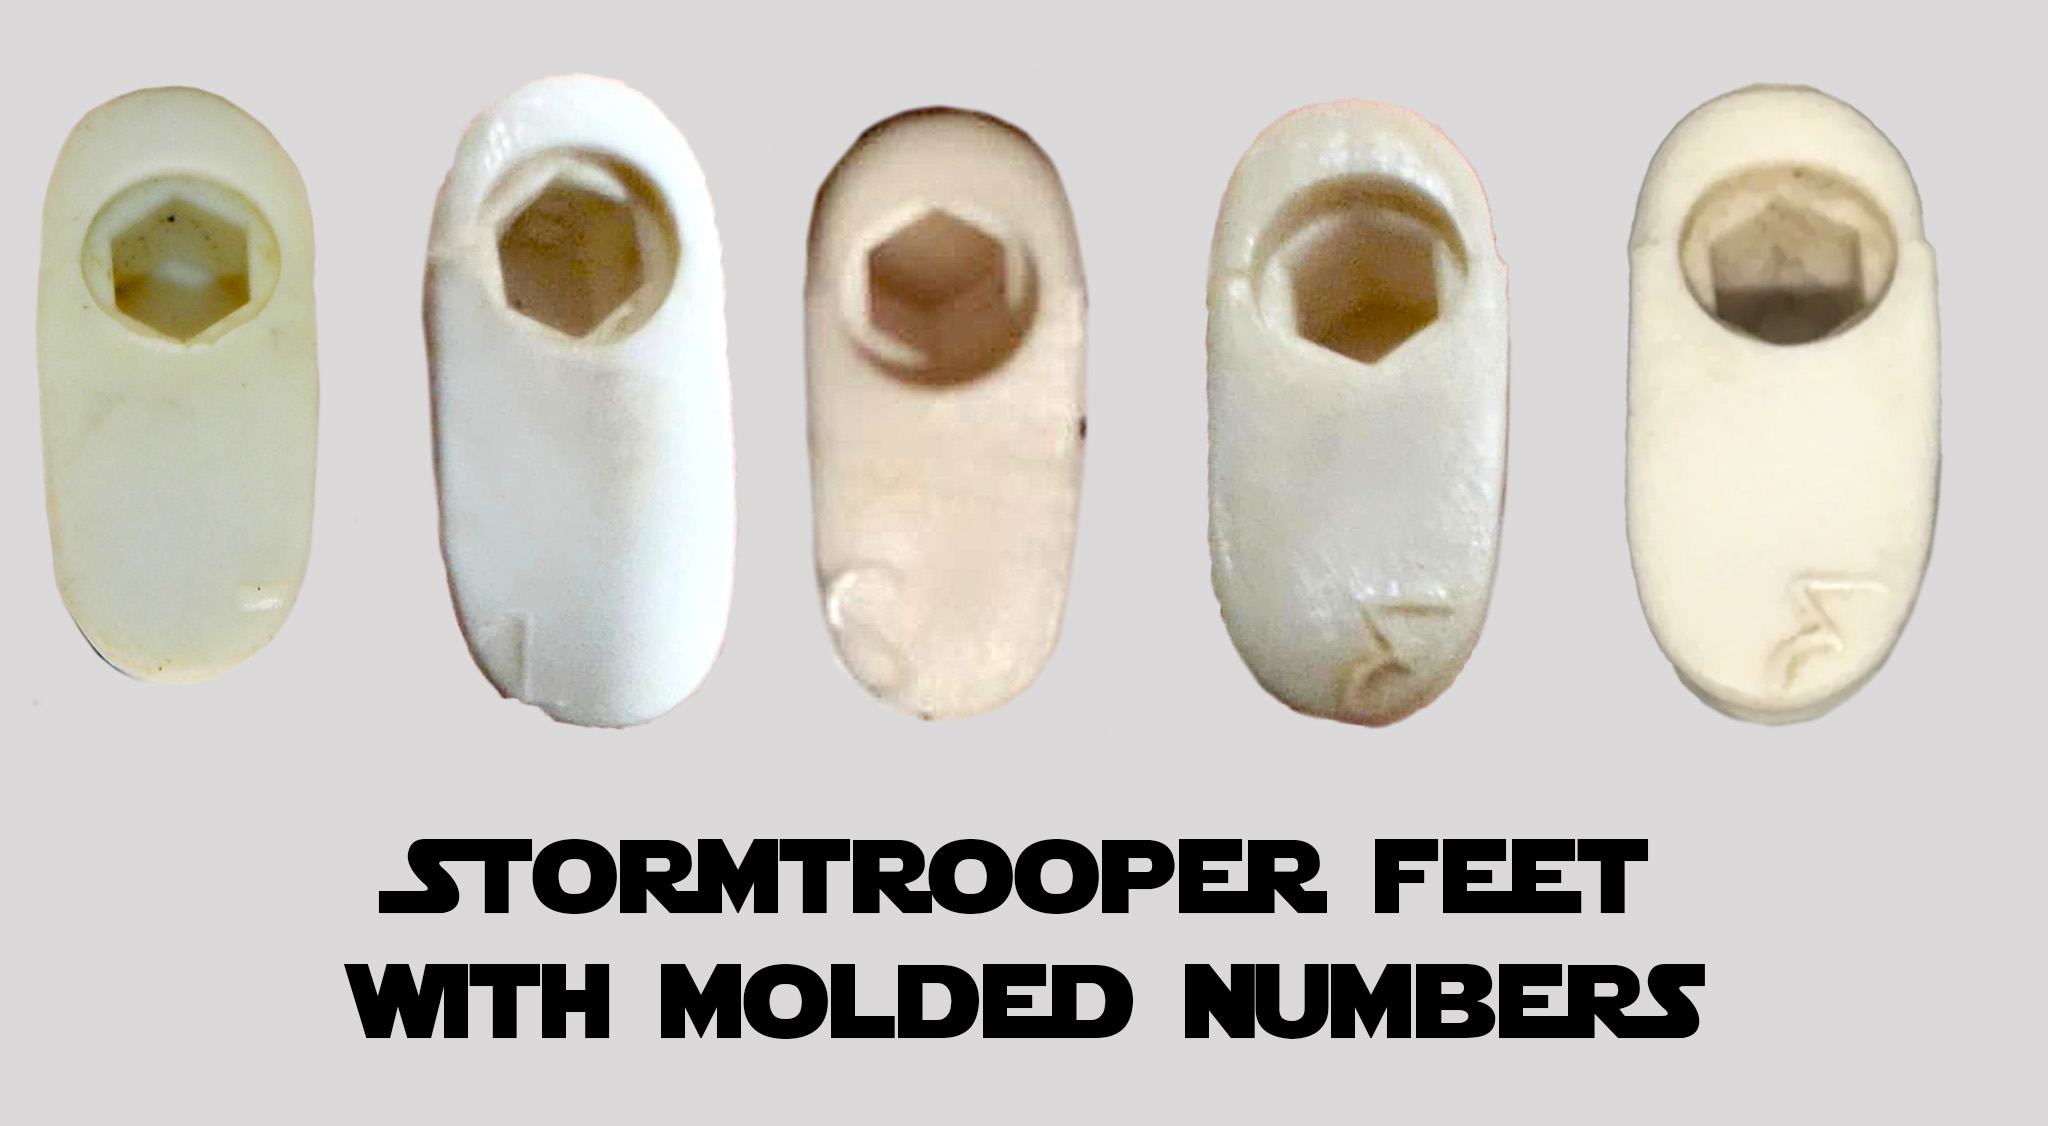 Some early Stormtroopers had numbers molded into the bottom of the feet, though this does not typically impact price.